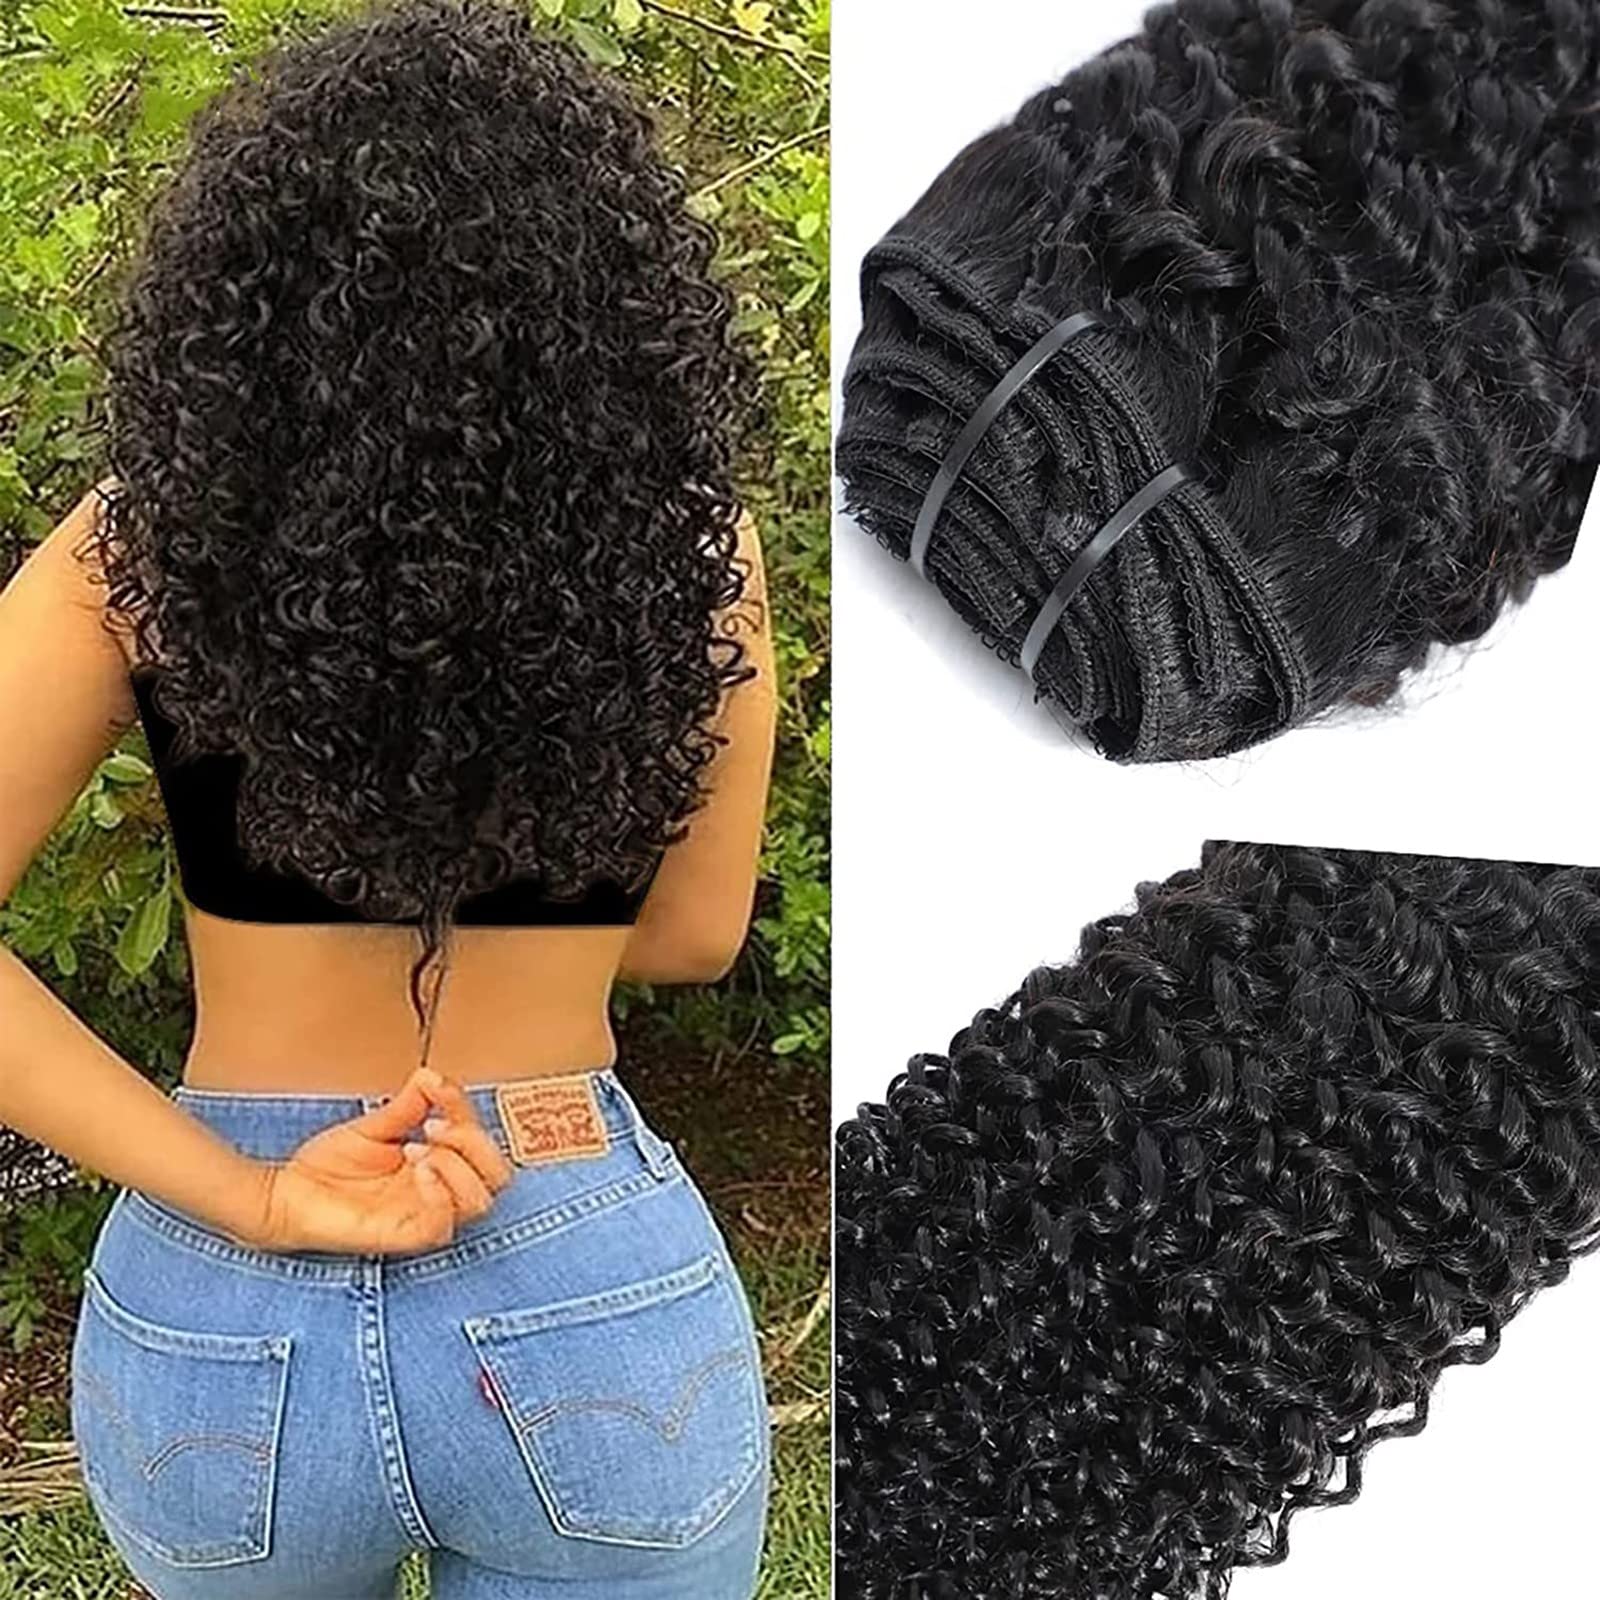 YLFC Natural Color Clip Echthaarverlängerungen 120G/Set Full Head Kinky Remy Curly Echthaarverlängerung Clip Ins Für Frauen Kinky Curly Natural Color 14inch